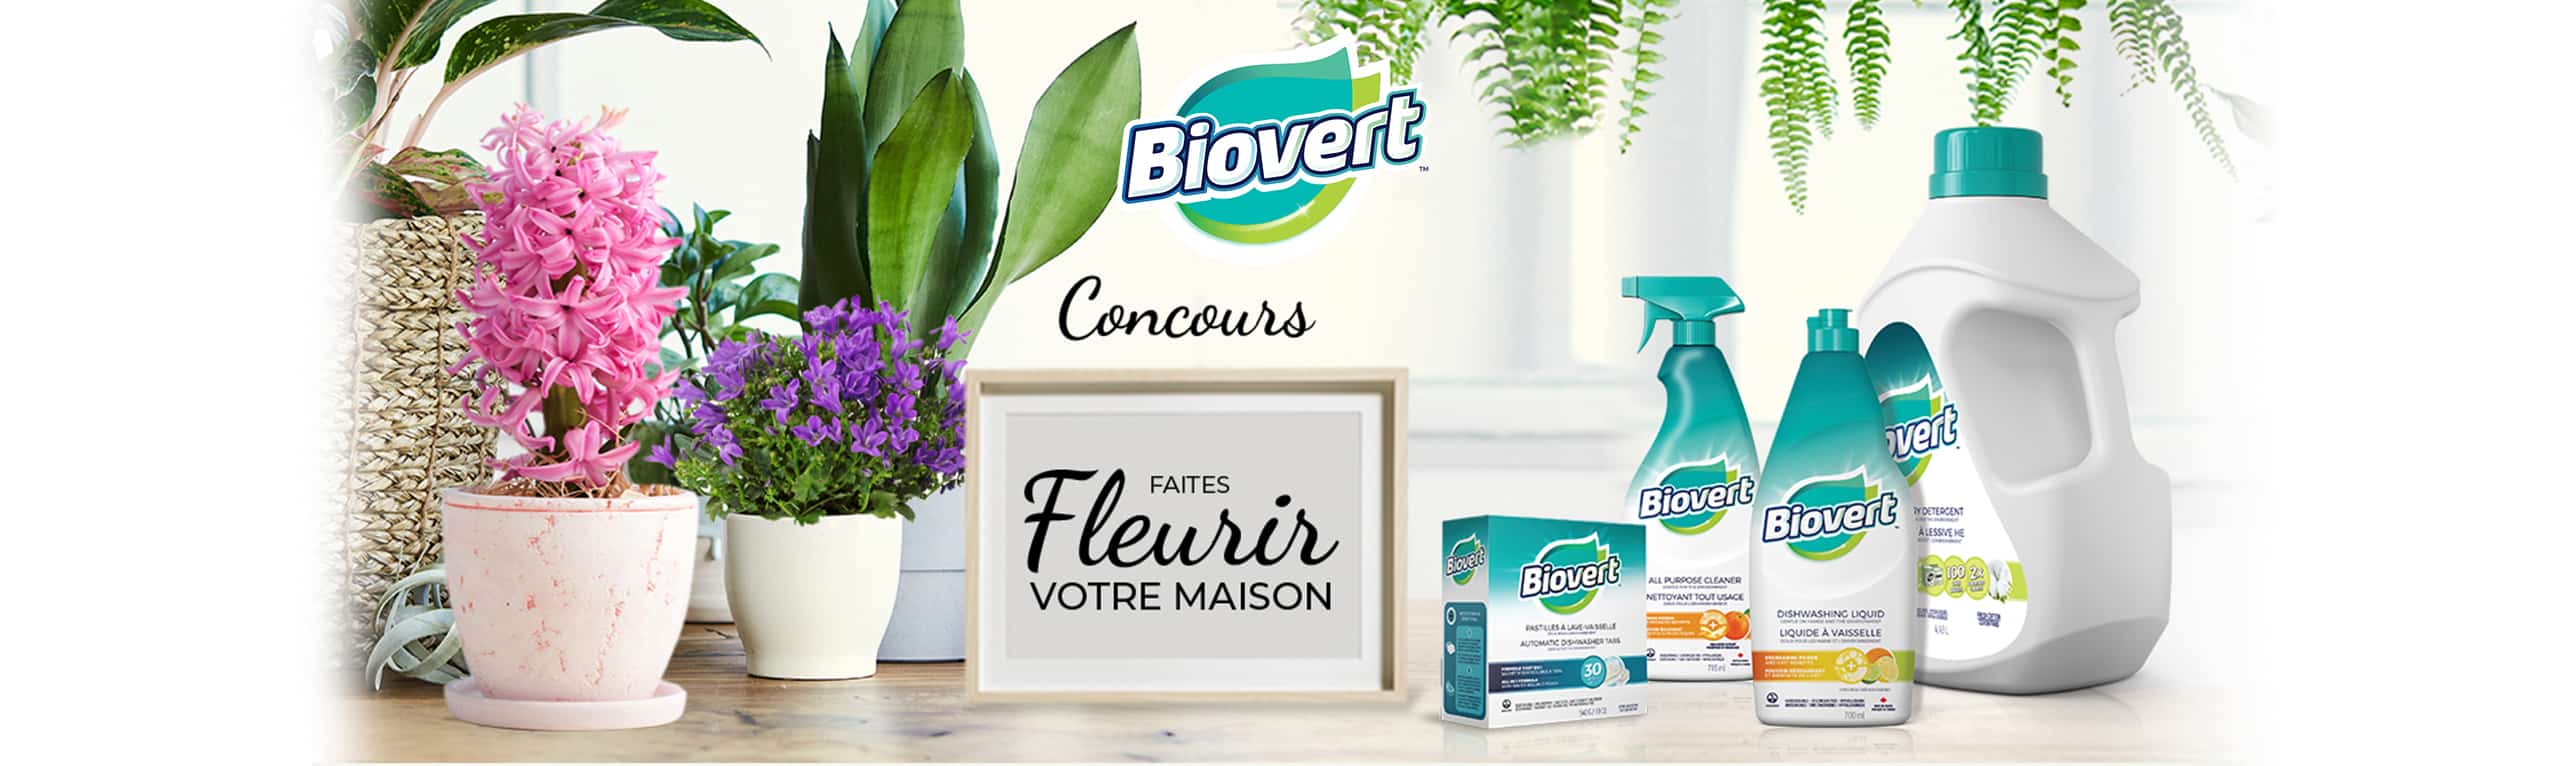 biovert concours